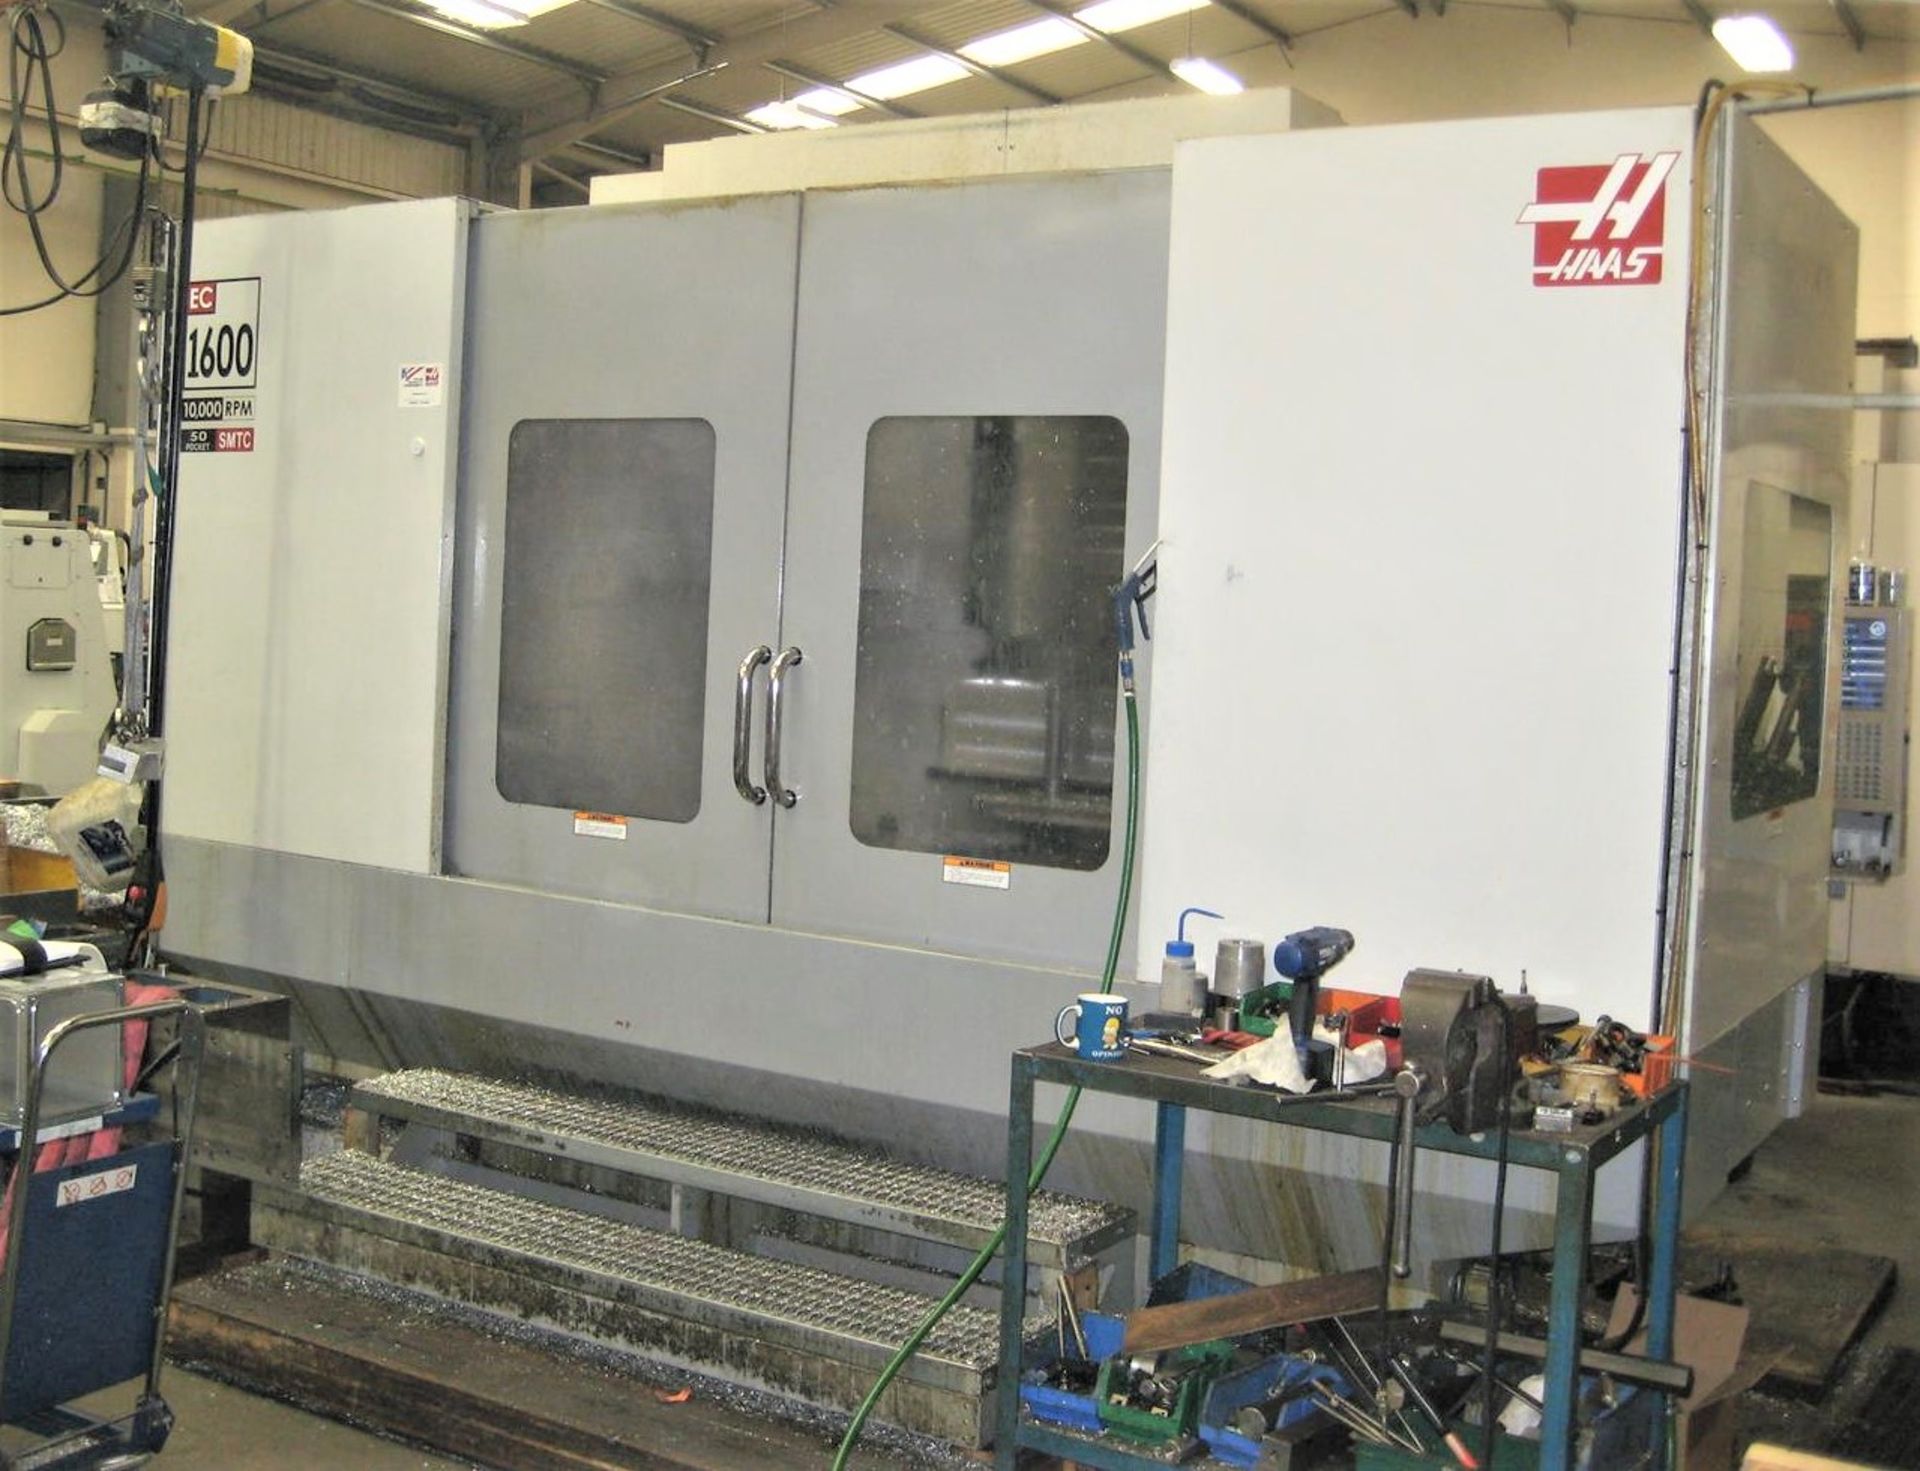 Haas EC-1600YZT CNC 4-Axis Horizontal Machining Center with Extended Z Travel, S/N 2052098, New 2008